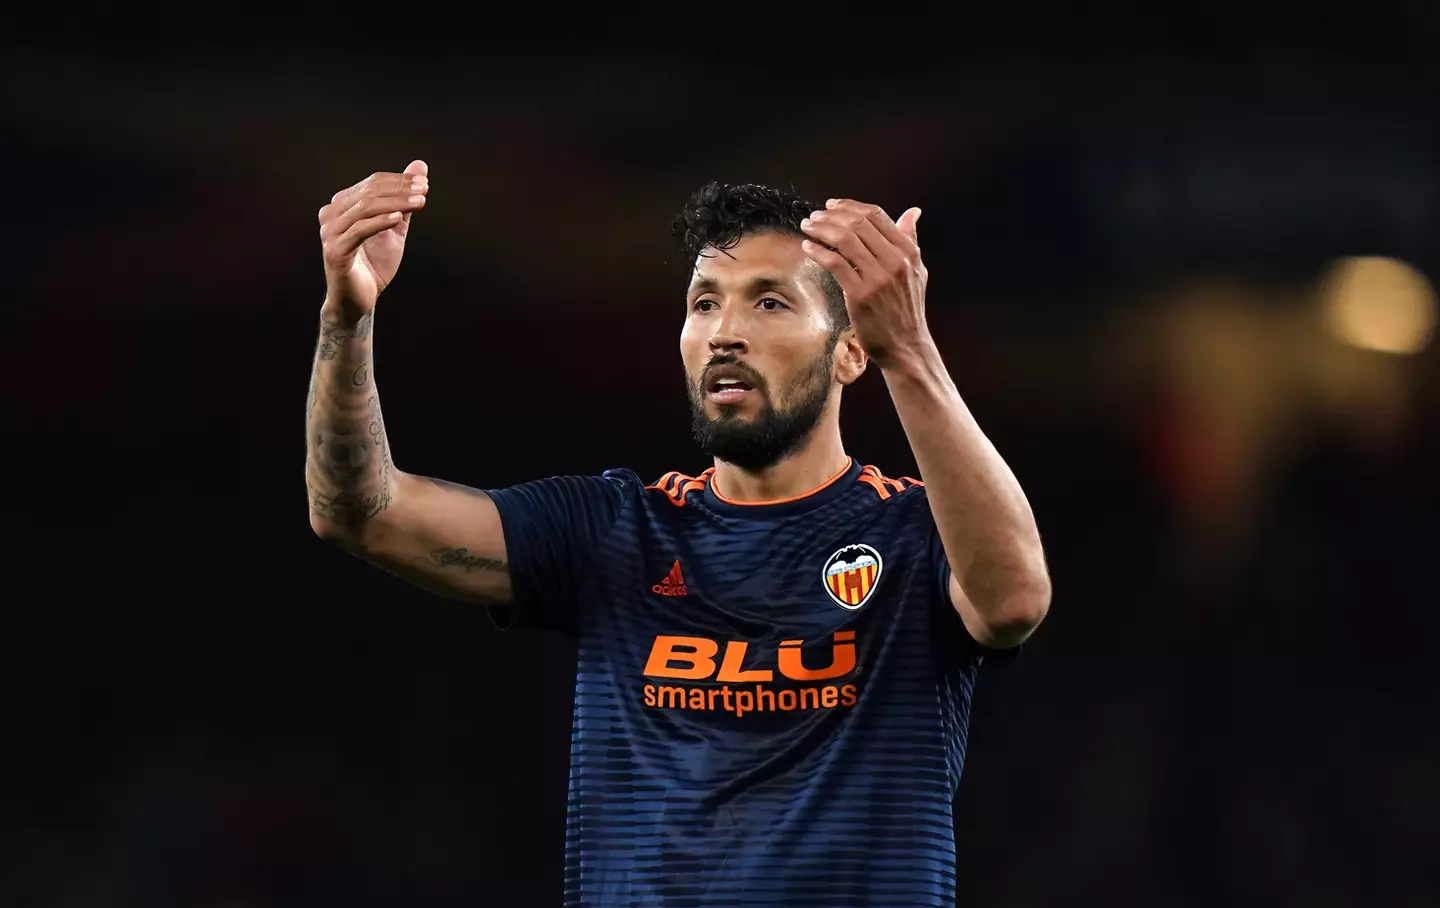 Former Argentina defender Ezequiel Garay spent the final part of his club career with Valencia.